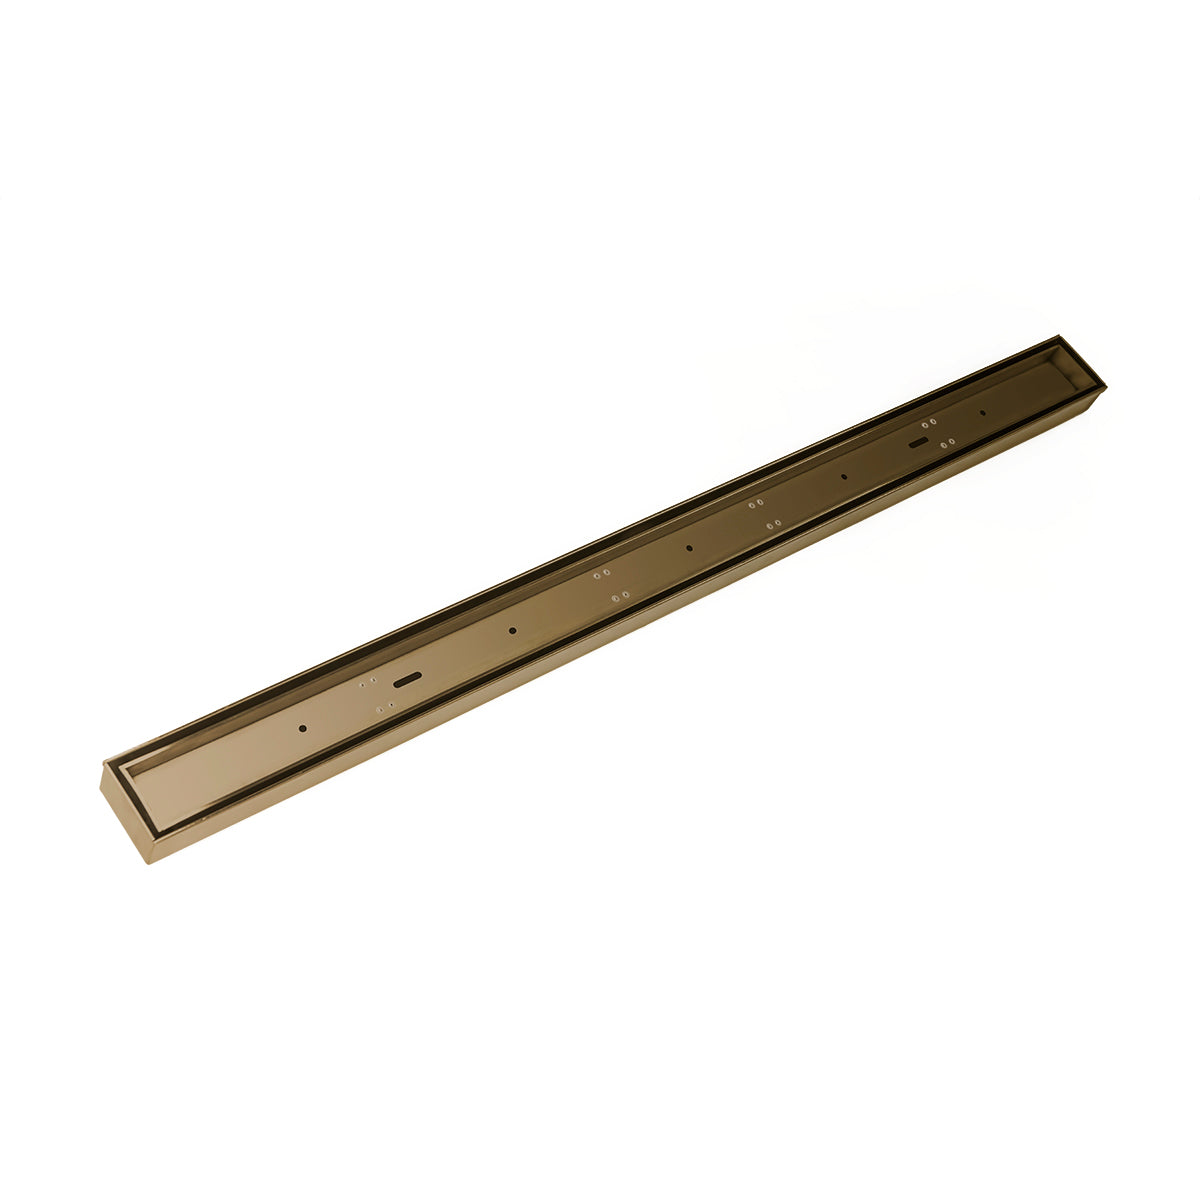 Infinity Drain 42" FX Low Profile Series Fixed Length Linear Drain Kit with Tile Insert Frame